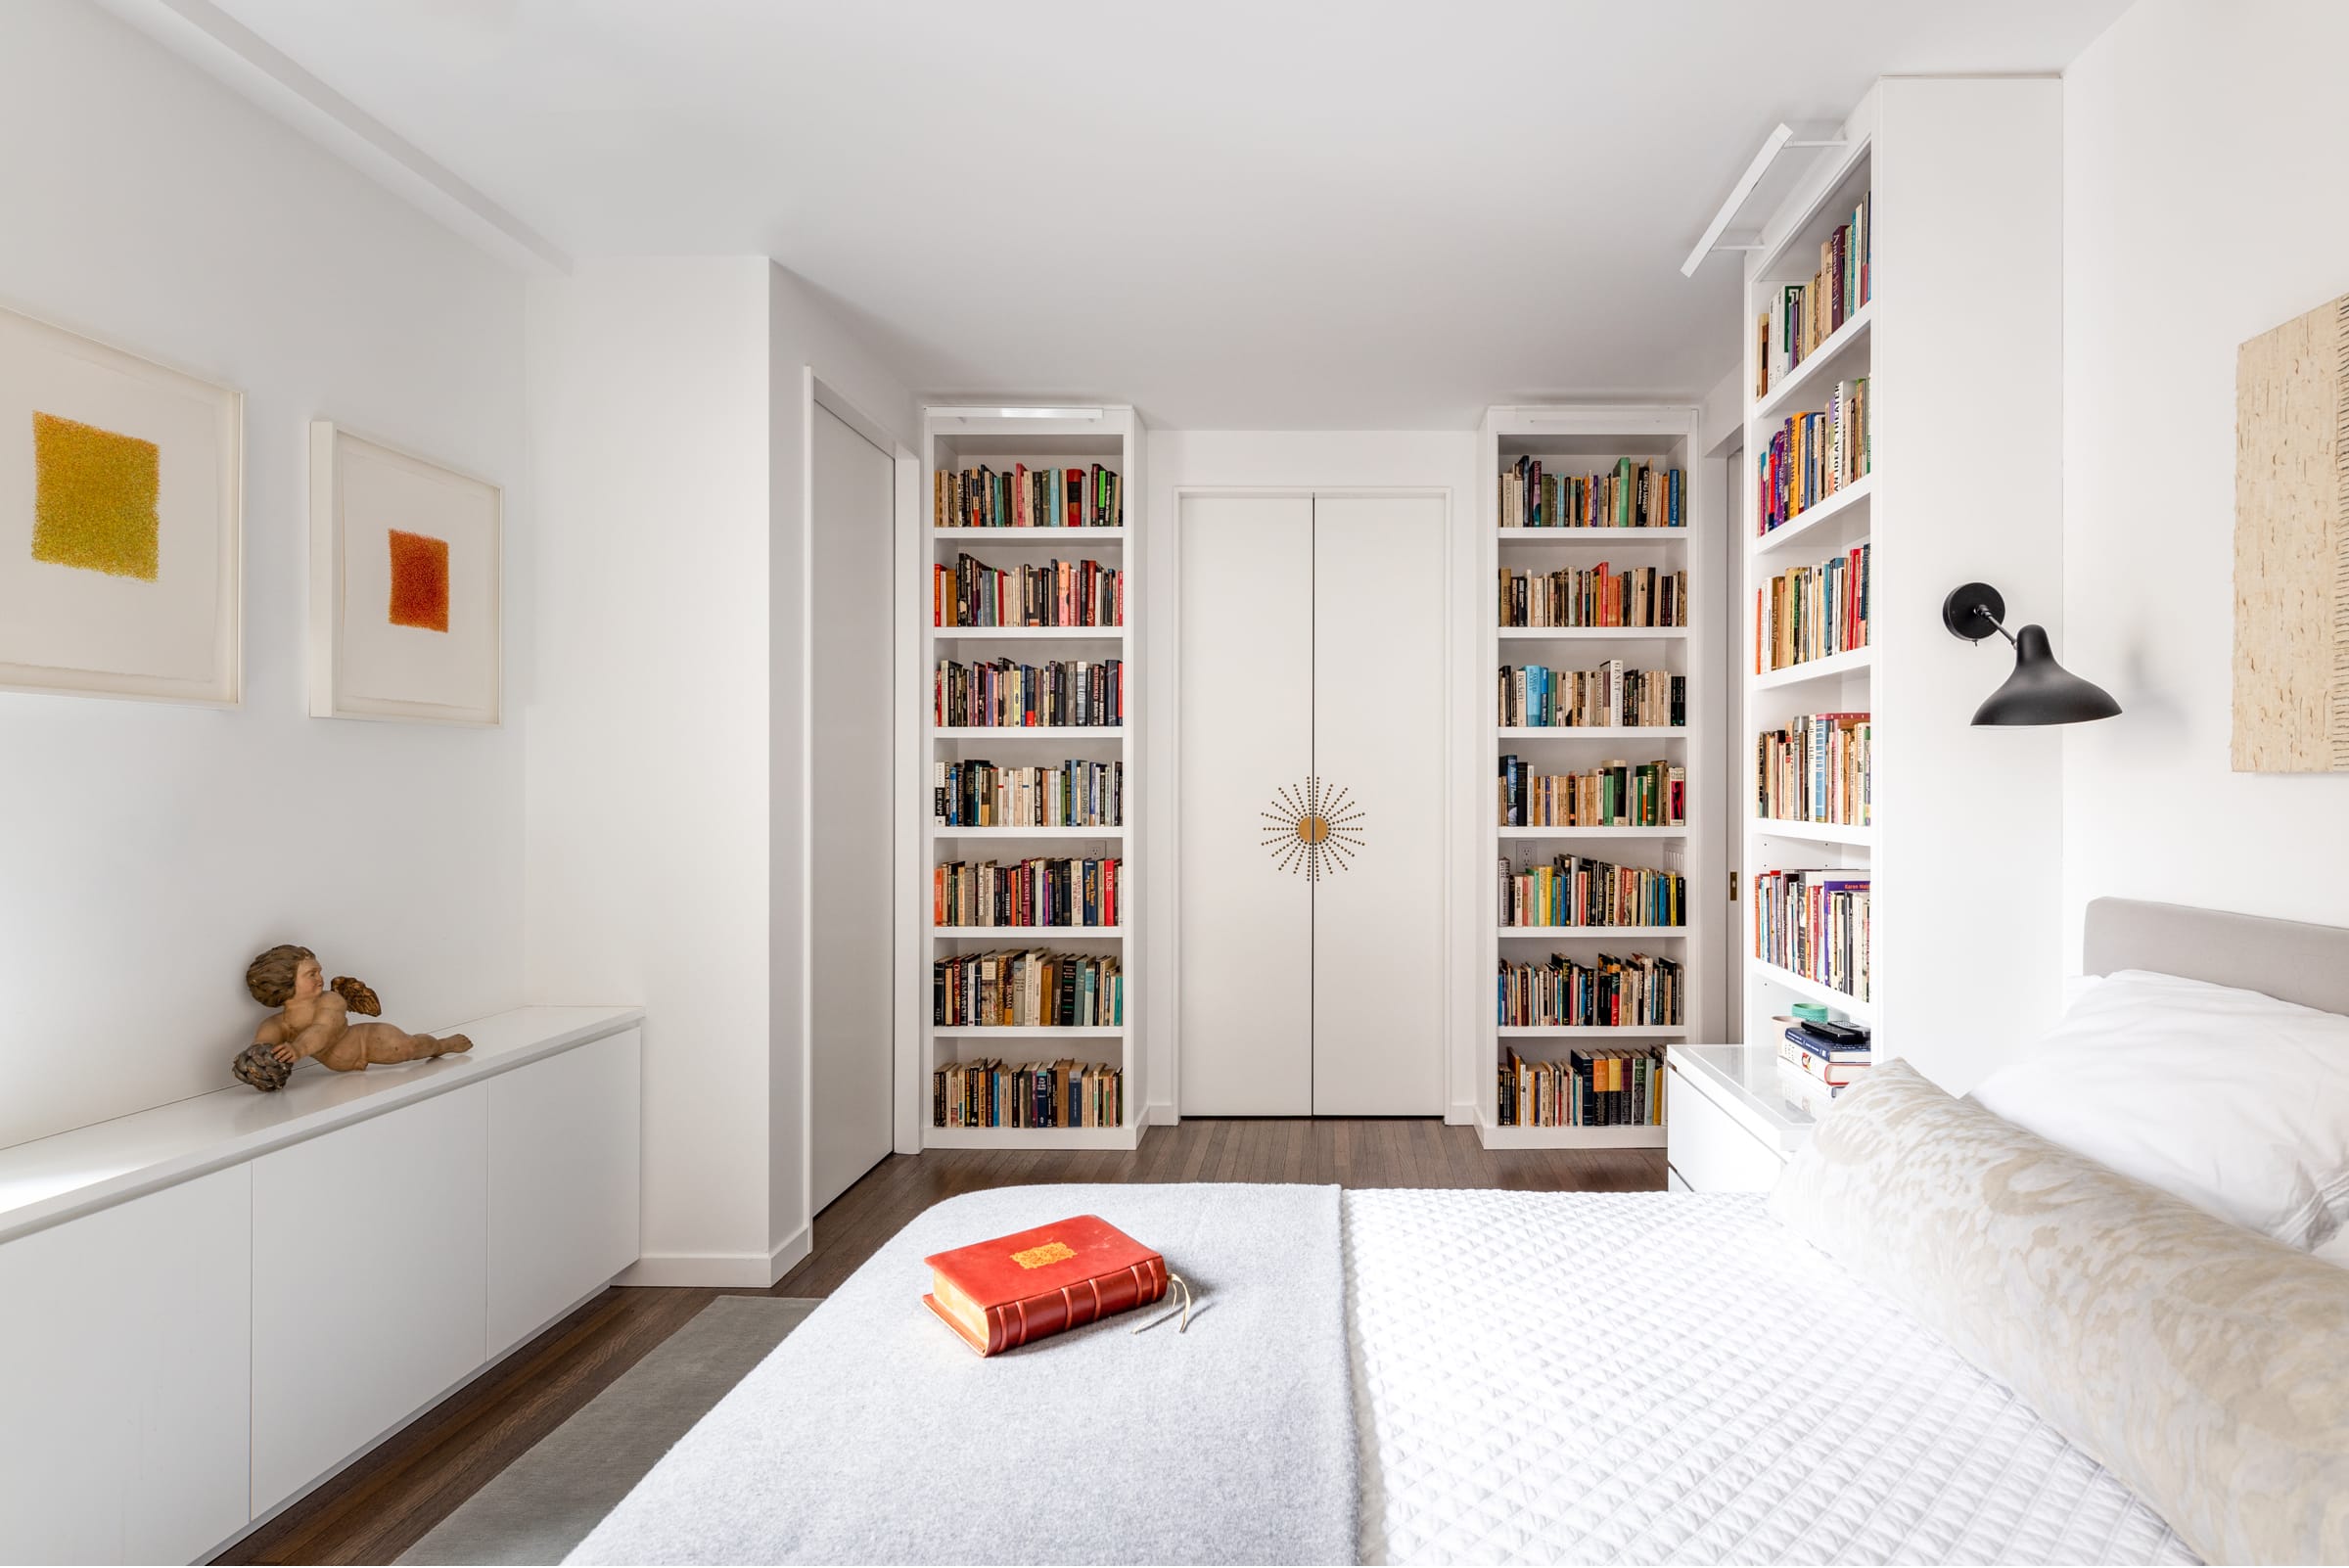 Bedroom with decorative closet doors and bookcases